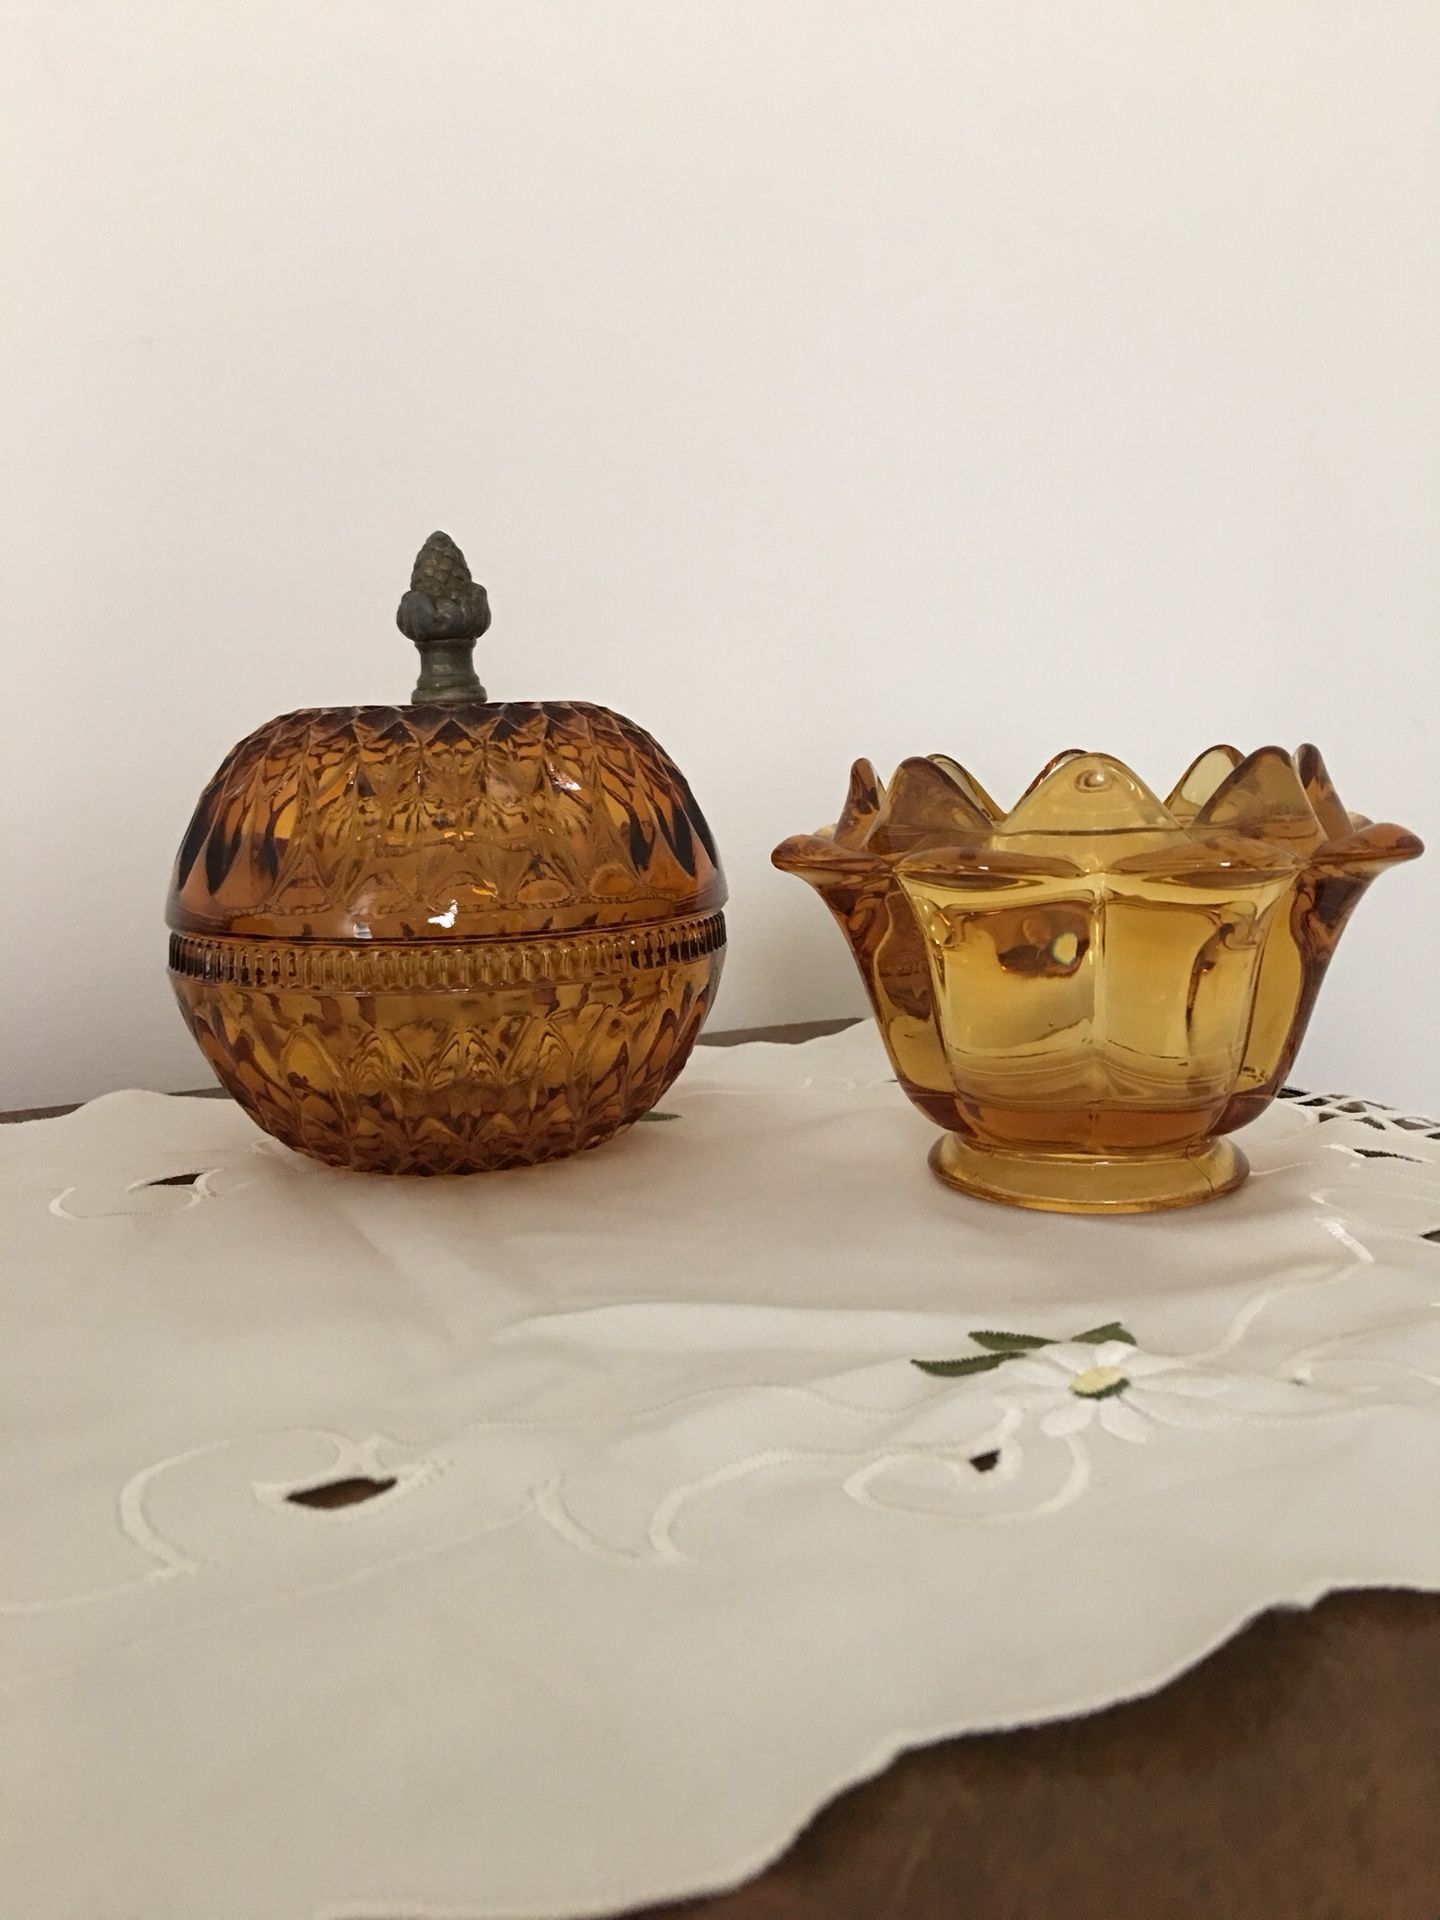 Amber etched candy dishes?